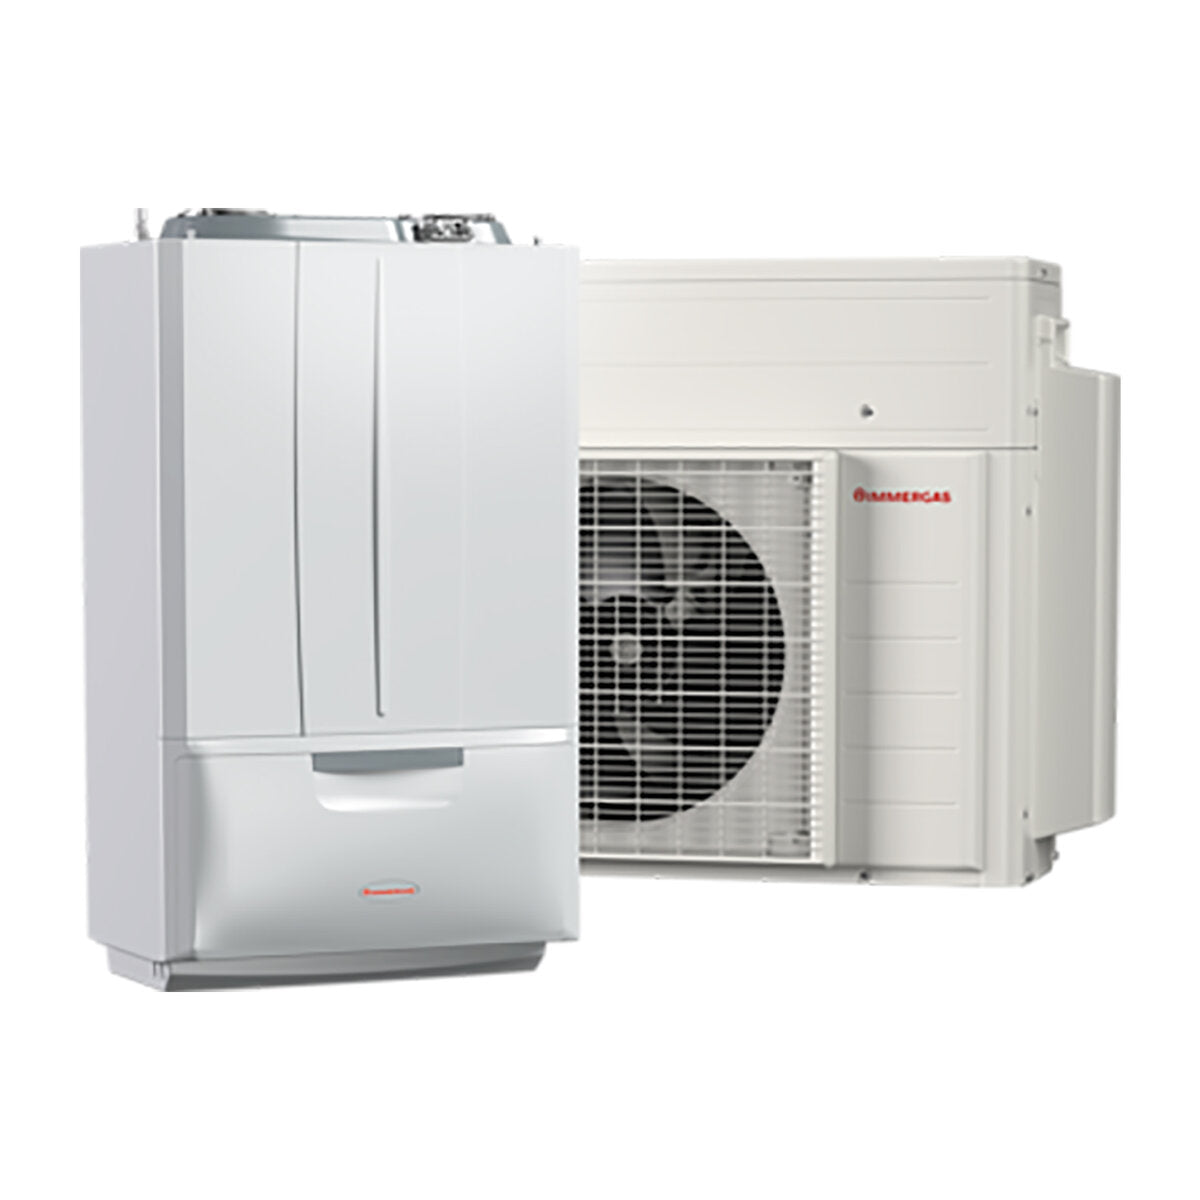 Hybrid heat pump system integrated with Immergas Victrix Hybrid 4 kW methane condensing boiler